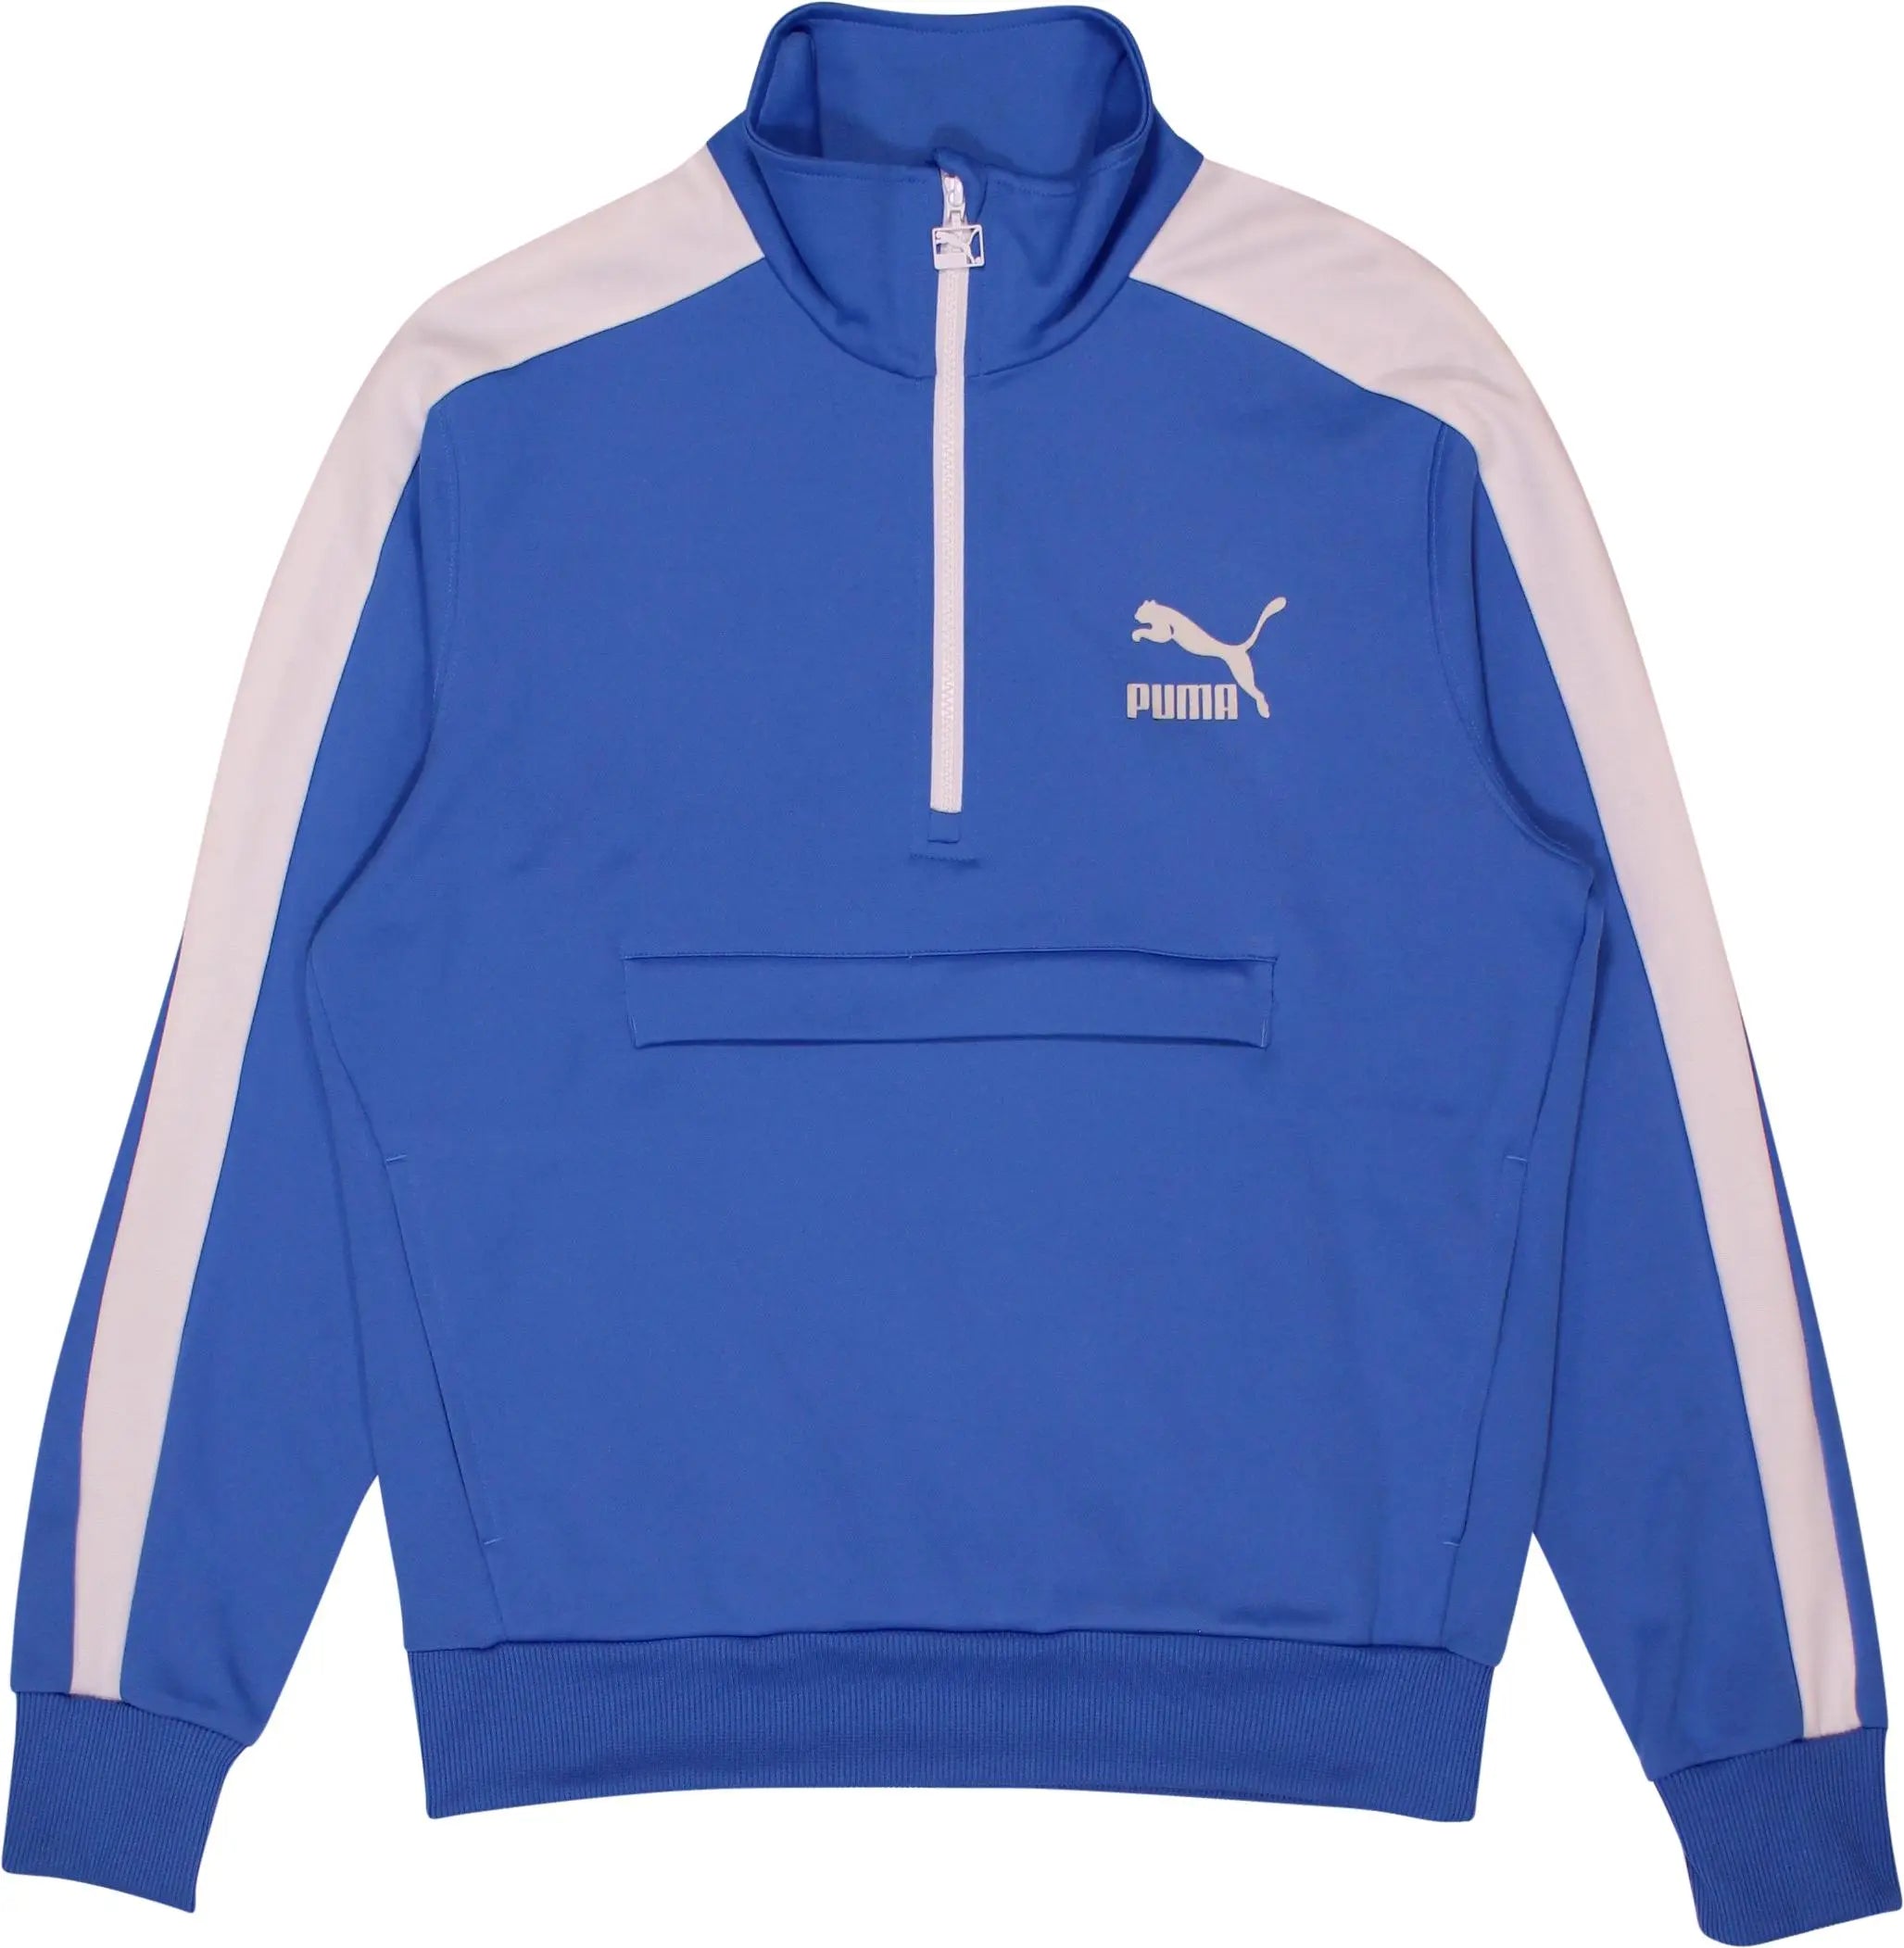 Puma - Blue Quarter Zip Sweater by Puma- ThriftTale.com - Vintage and second handclothing